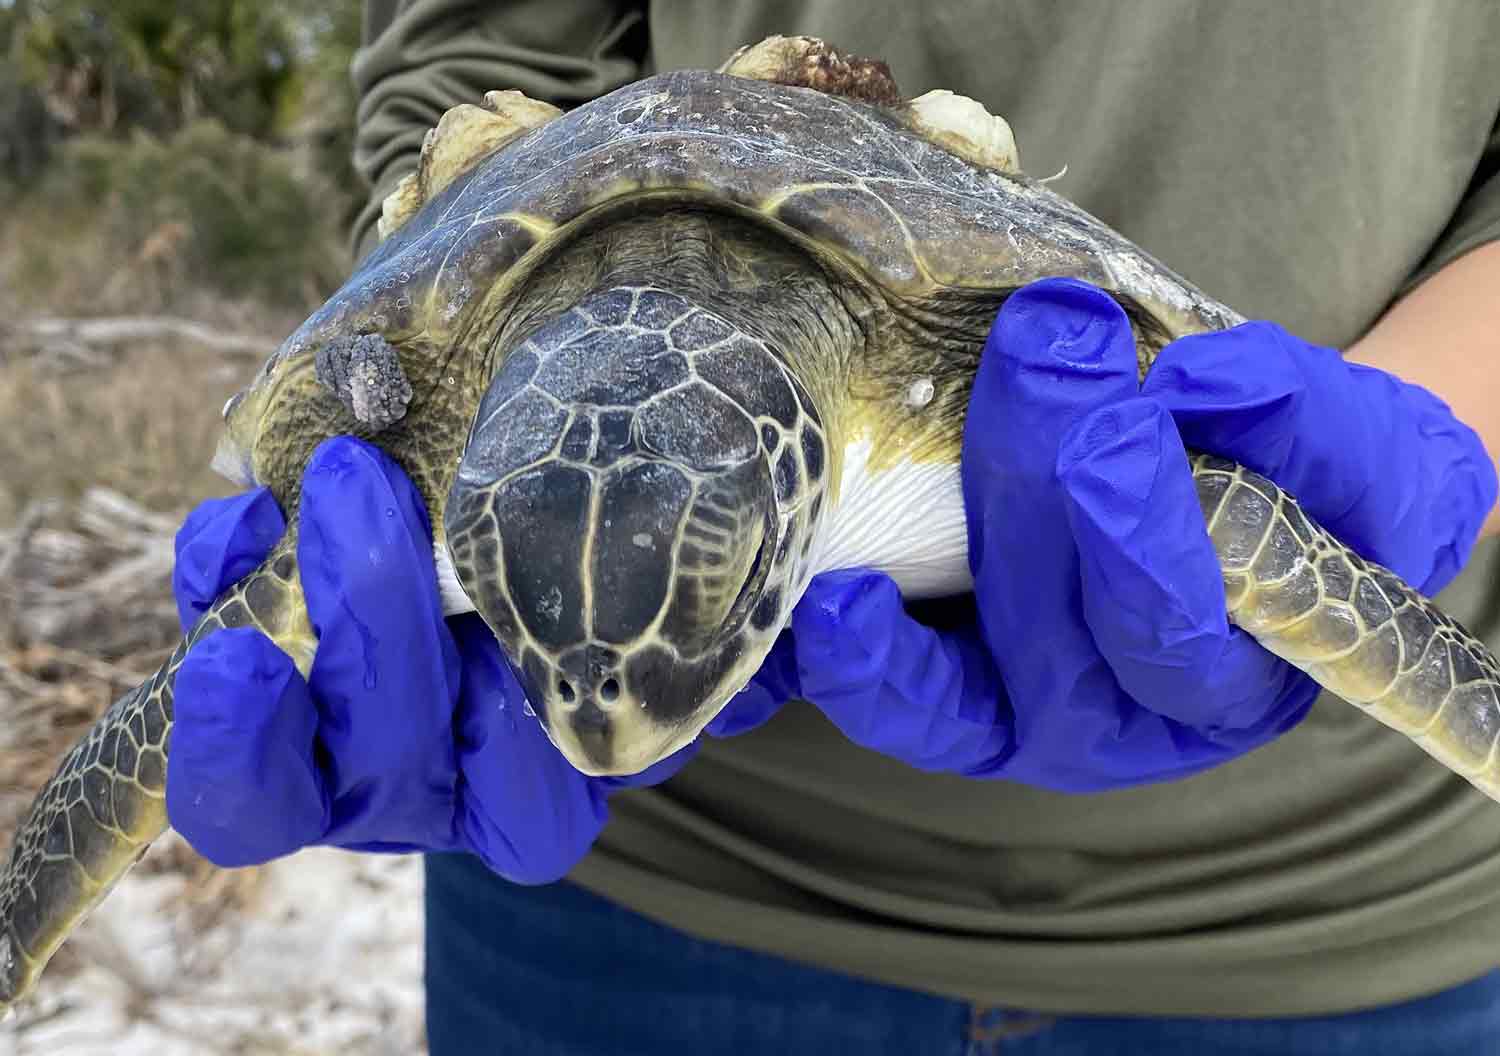 A sea turtle is shown close up, being held by a person wearing blue gloves.